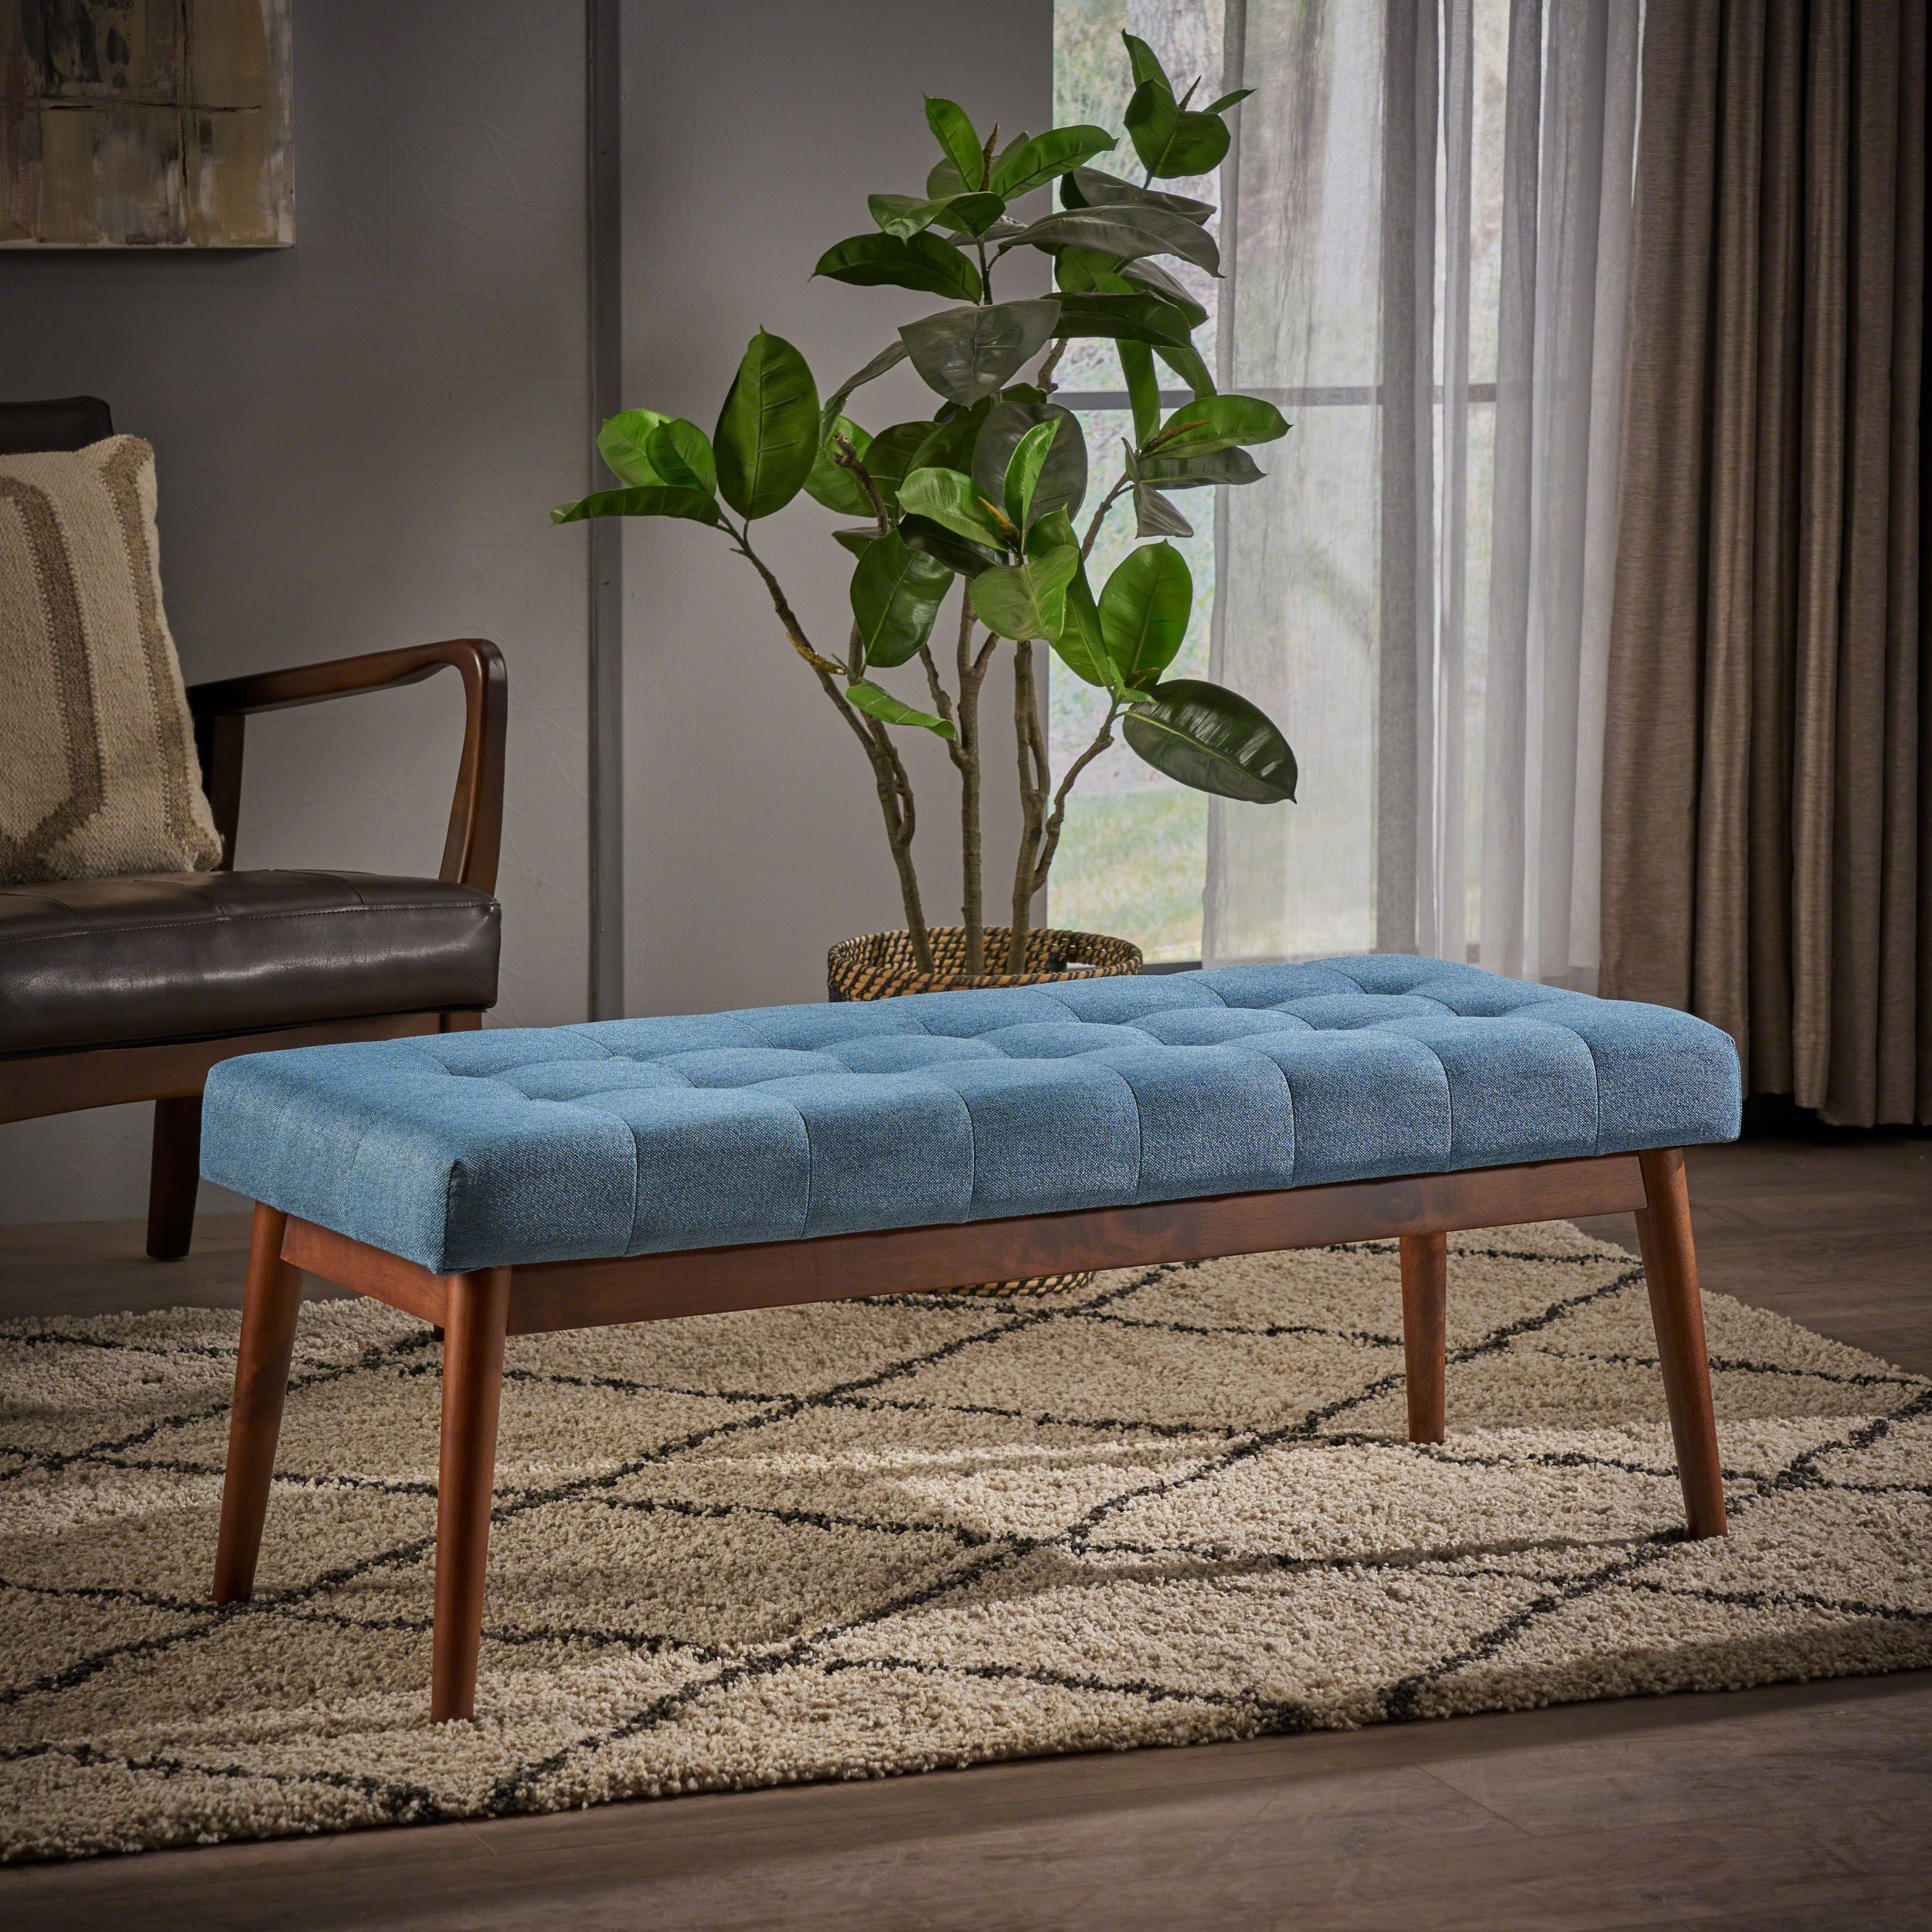 Noble House Marvin Mid Century Tufted Fabric Ottoman, Blue, Walnut Inside Latest Snow Tufted Fabric Ottomans (View 6 of 10)